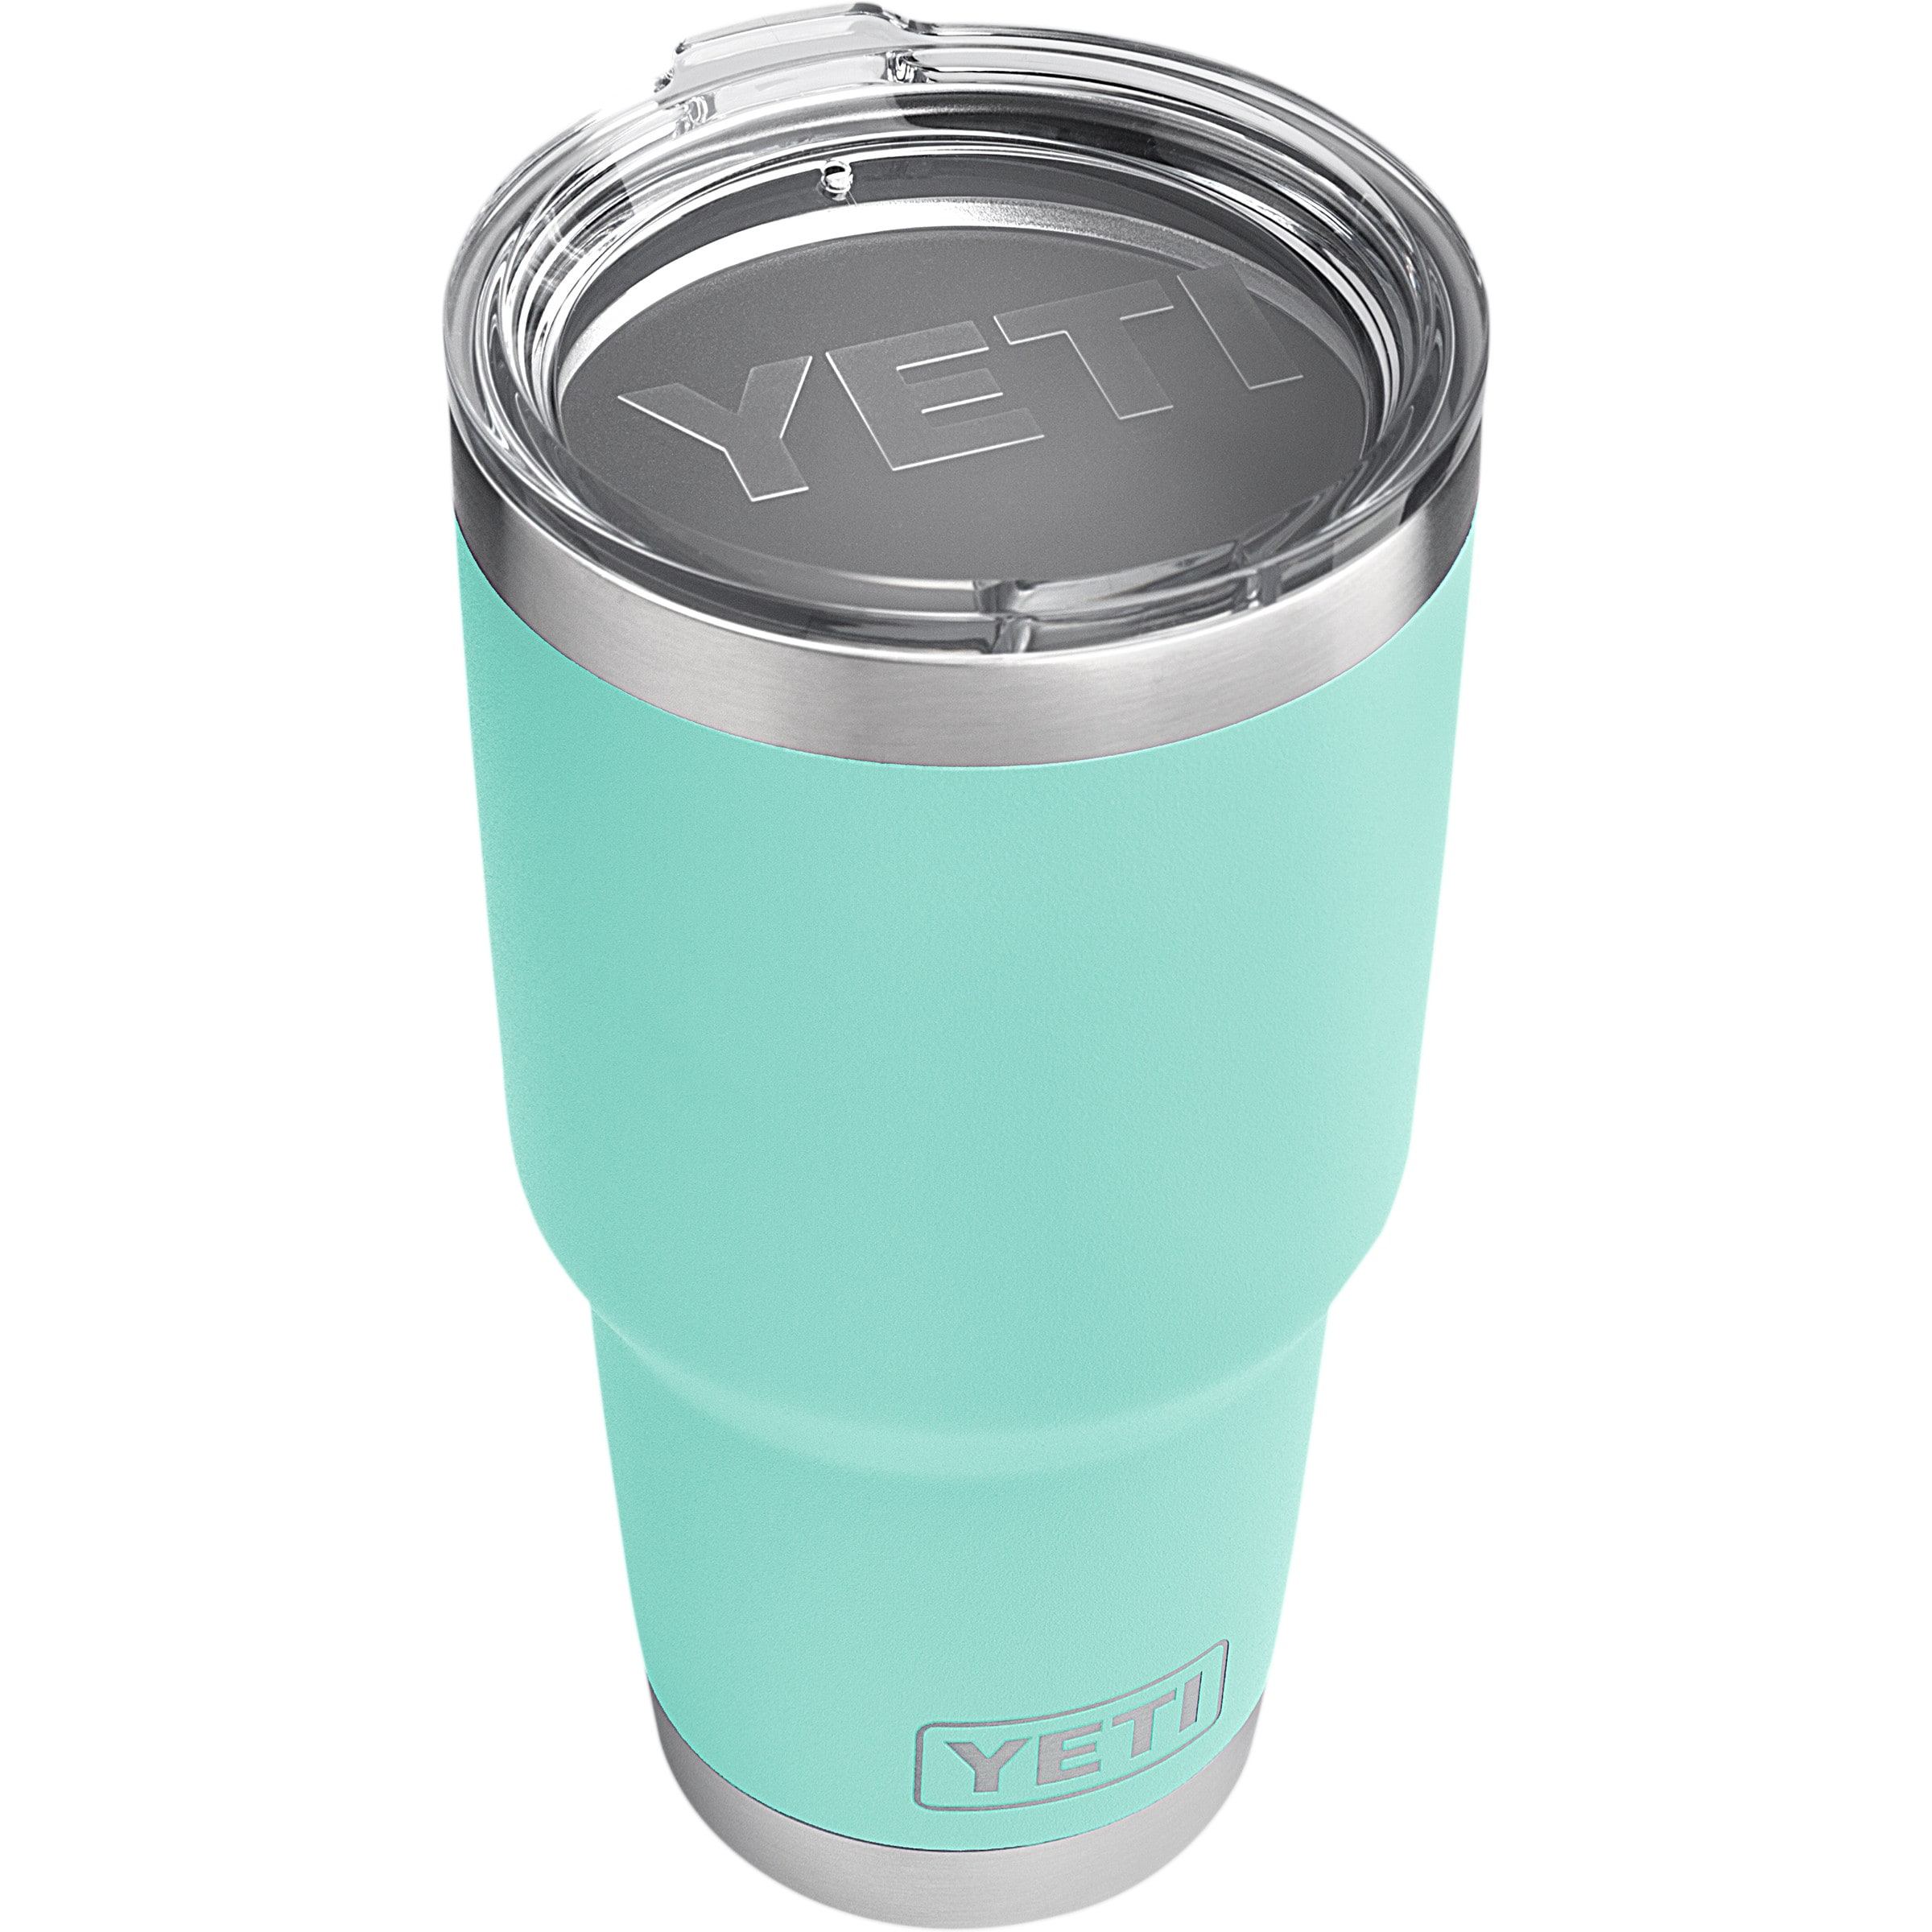 Yeti Rambler 30 Oz. Olive Green Stainless Steel Insulated Tumbler - Gillman  Home Center